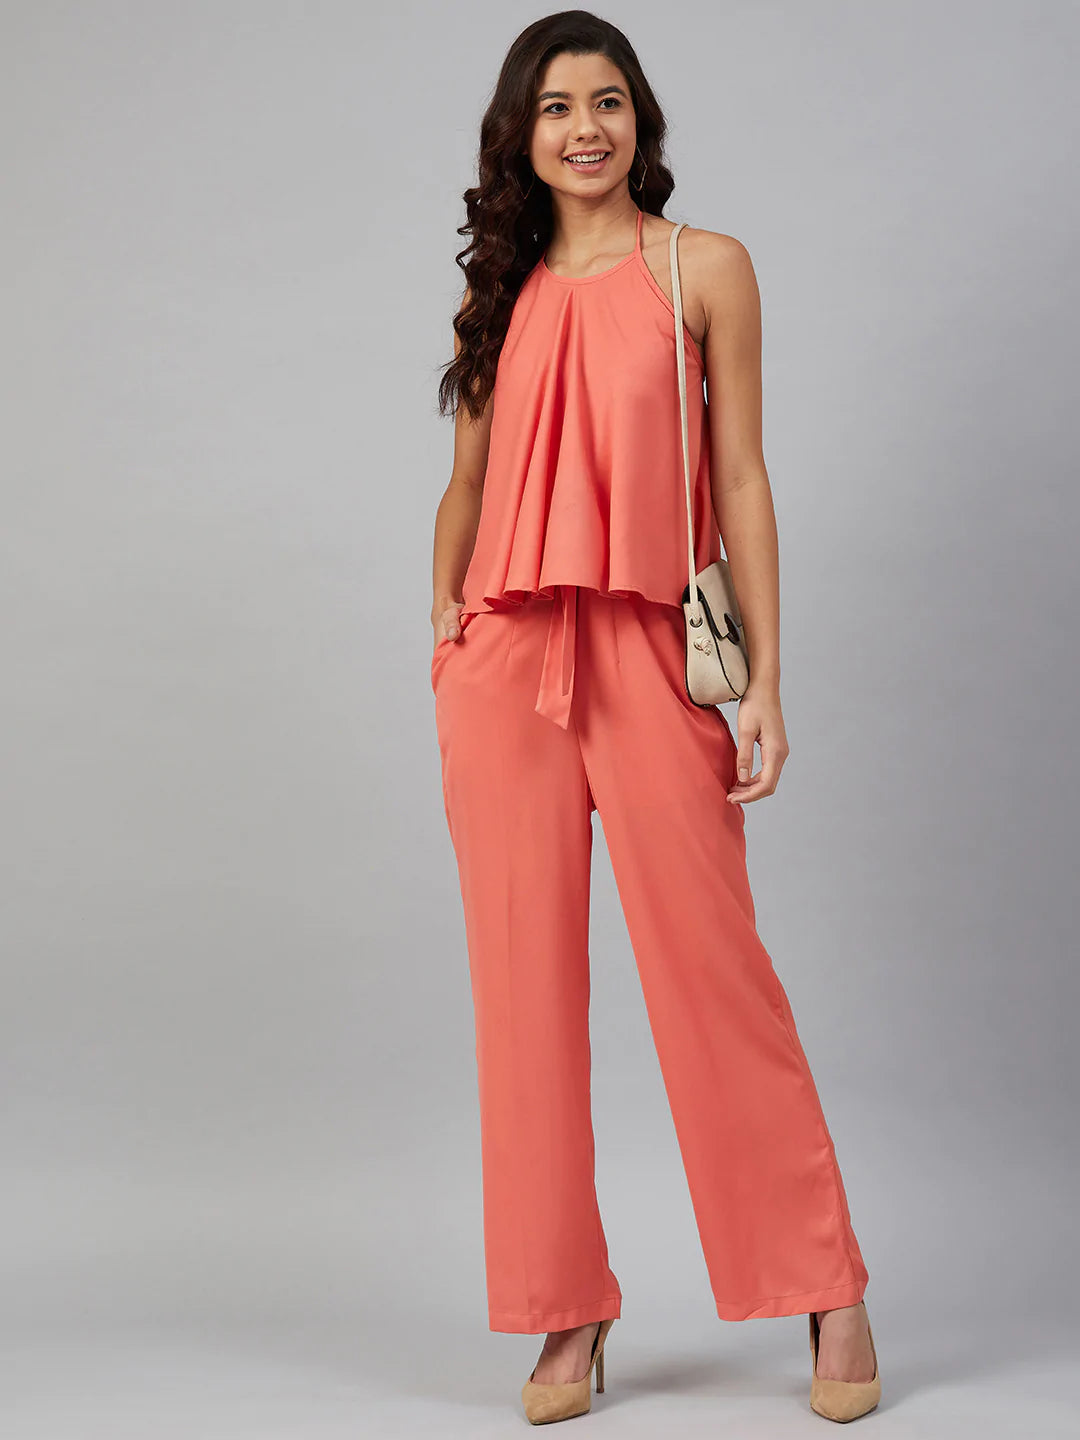 Jompers Women Peach-Coloured Solid Halter Neck Basic Jumpsuit ( JUP 8010 Peach )